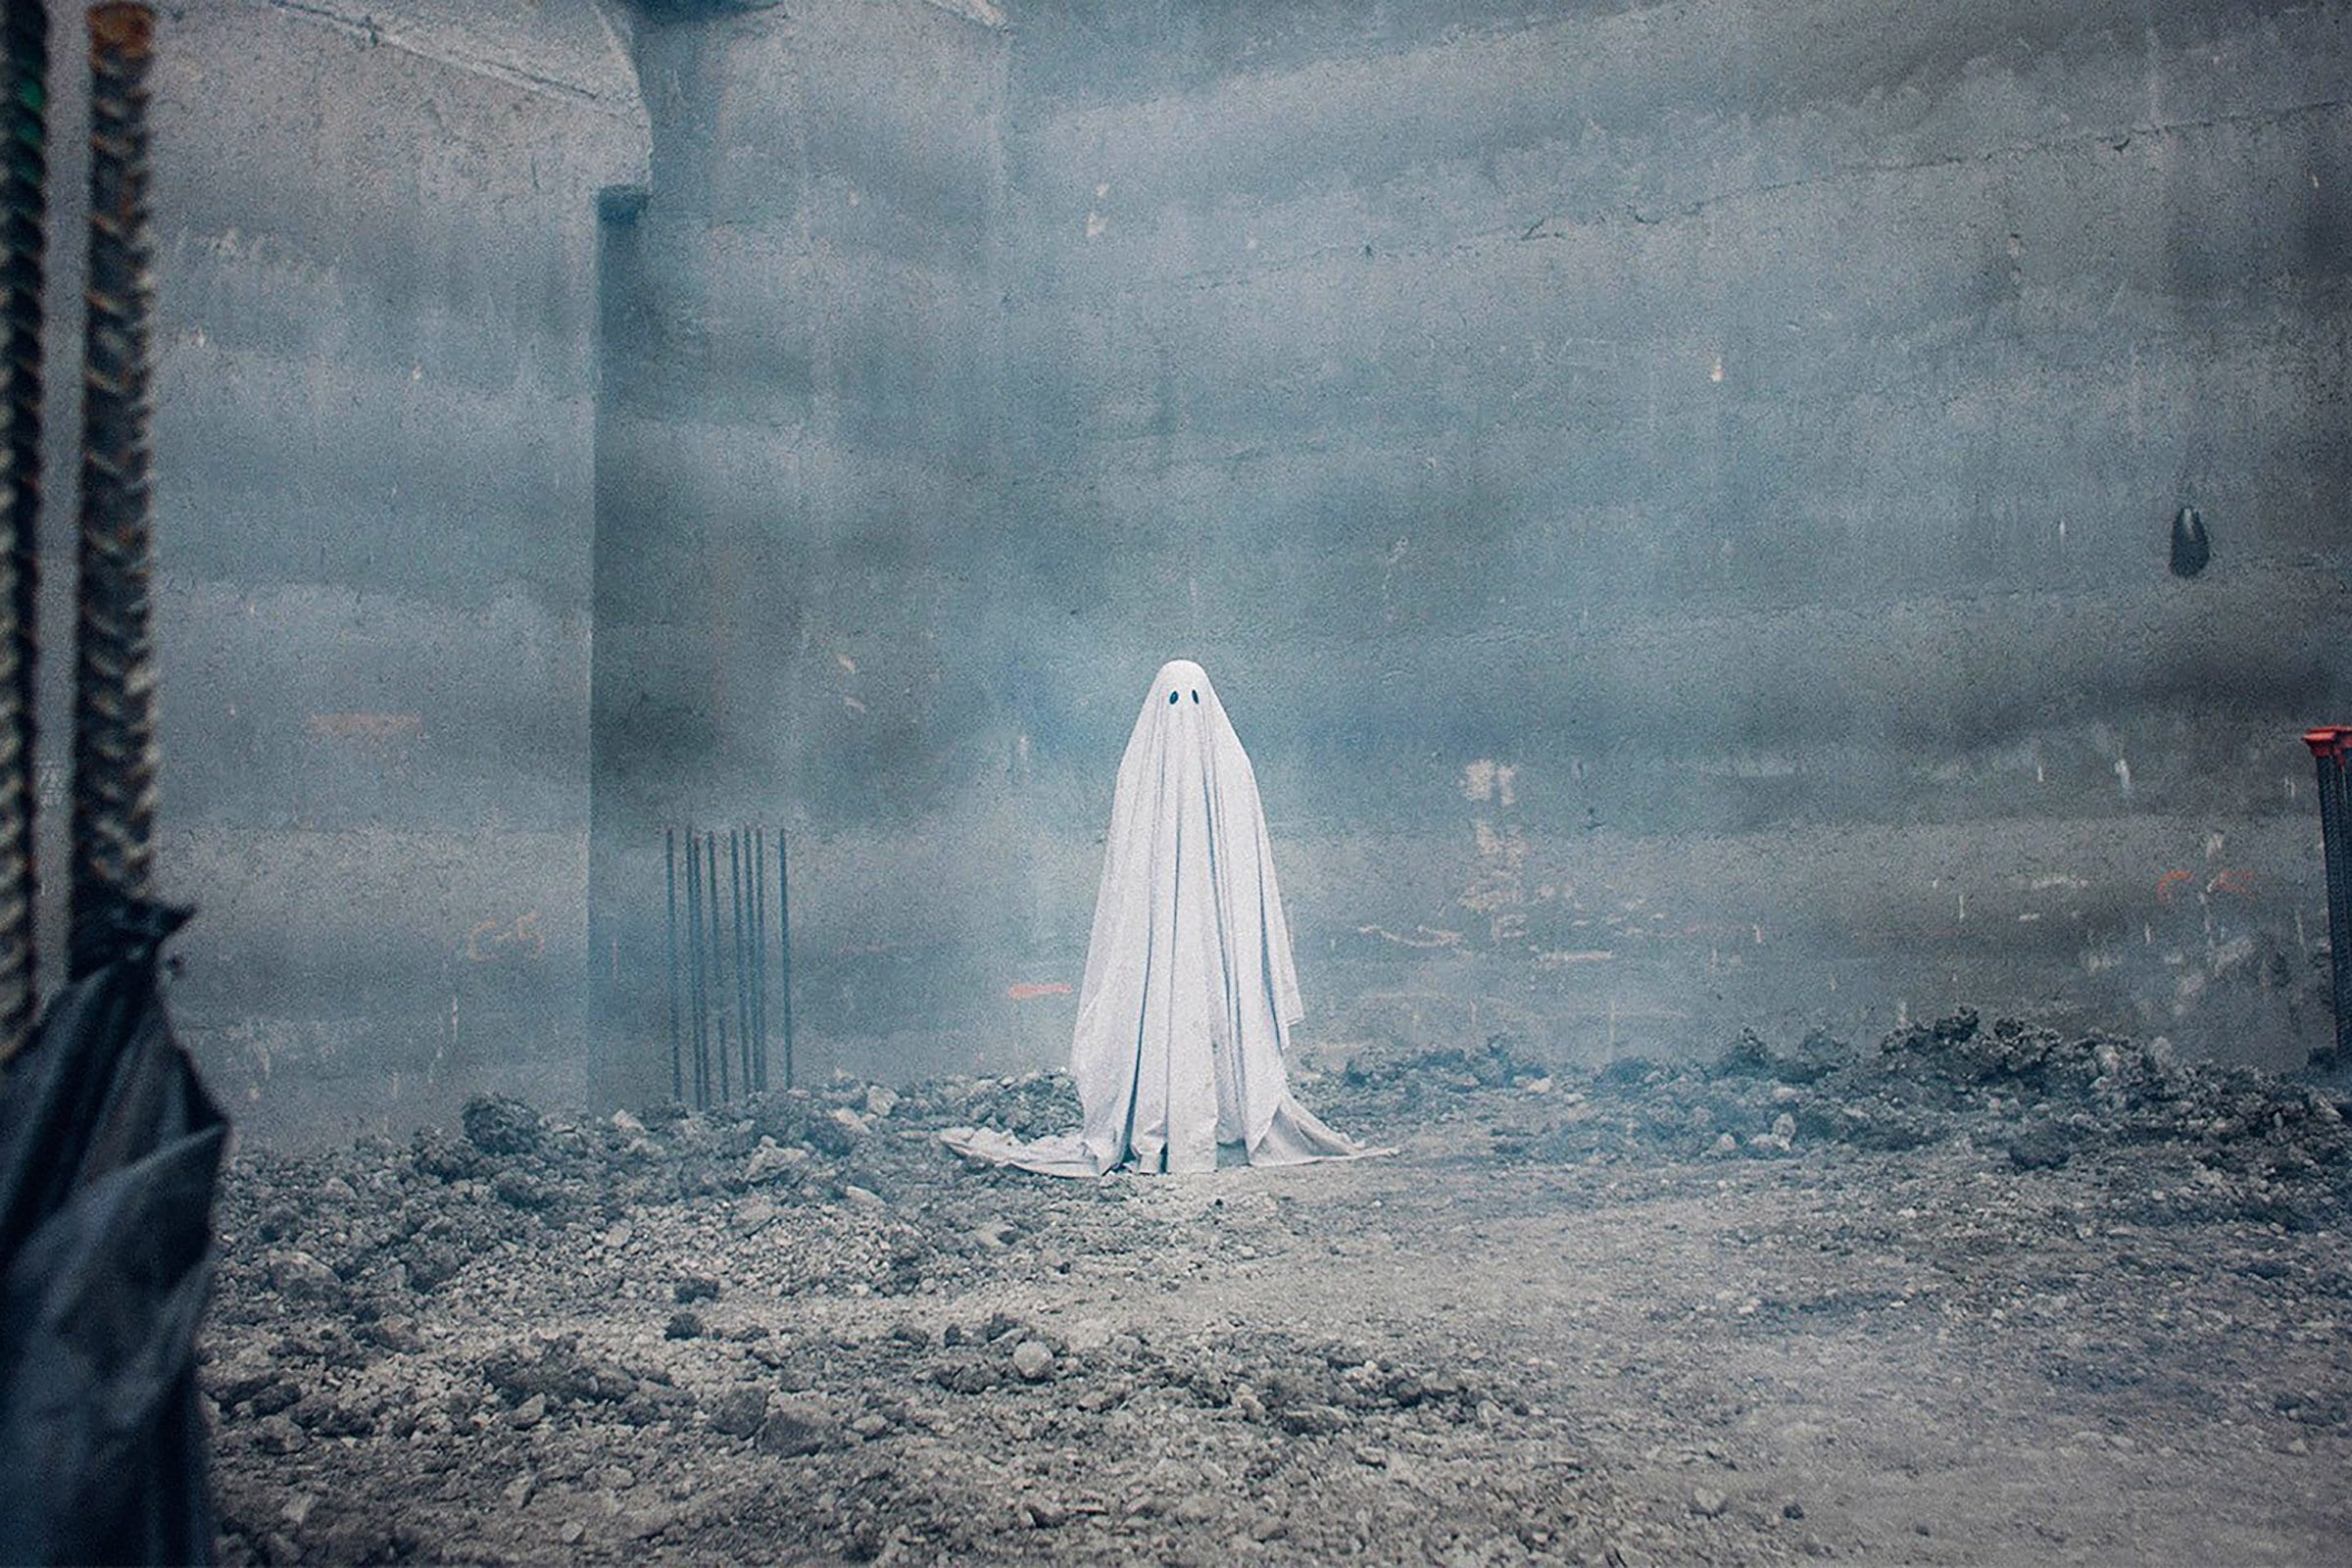 'A Ghost Story', directed by David Lowery, is pegged as a “singular exploration of legacy, loss, and the essential human longing for meaning”.